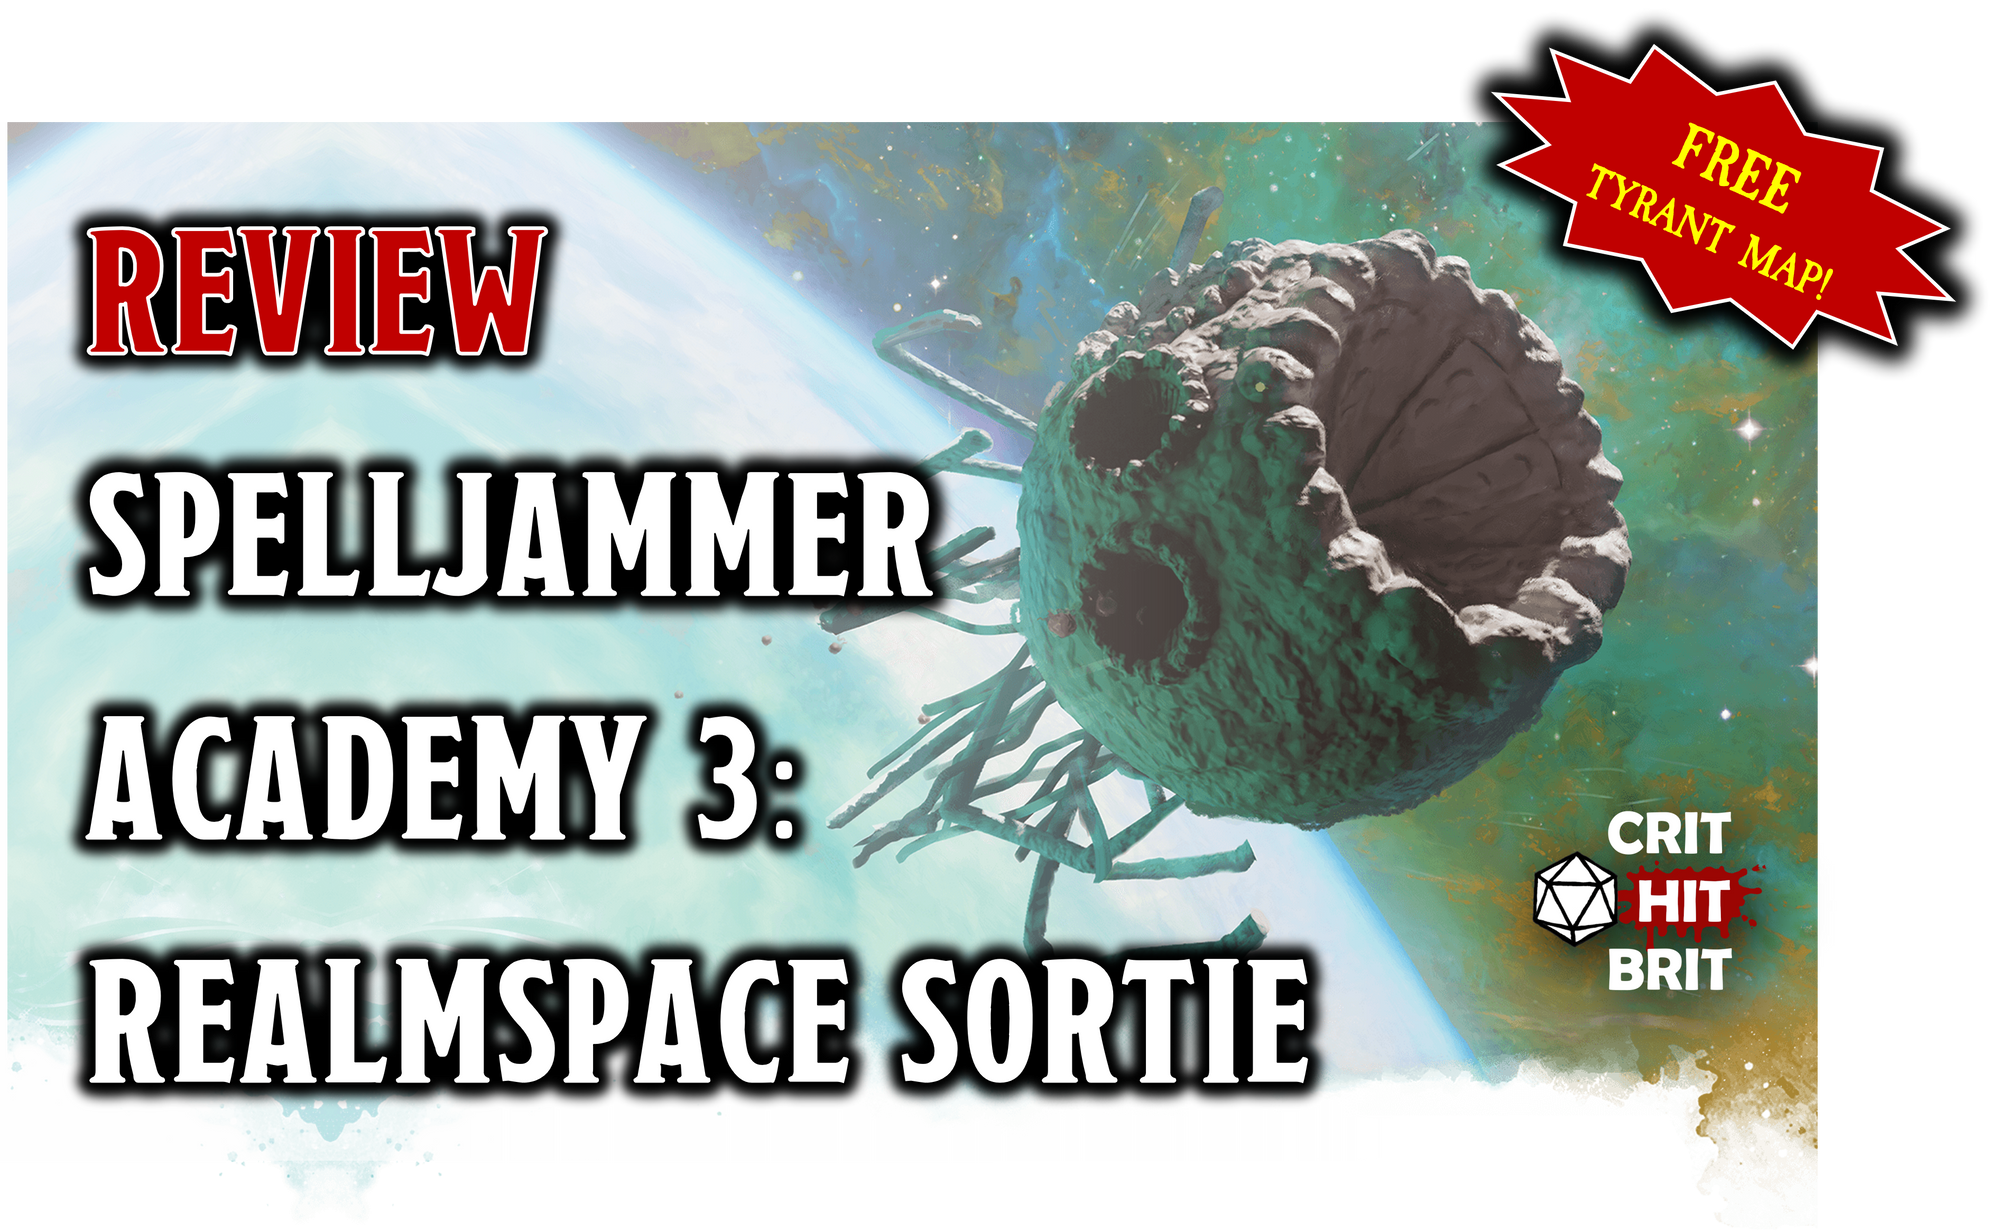 A Review of Spelljammer Academy: Realmspace Sortie